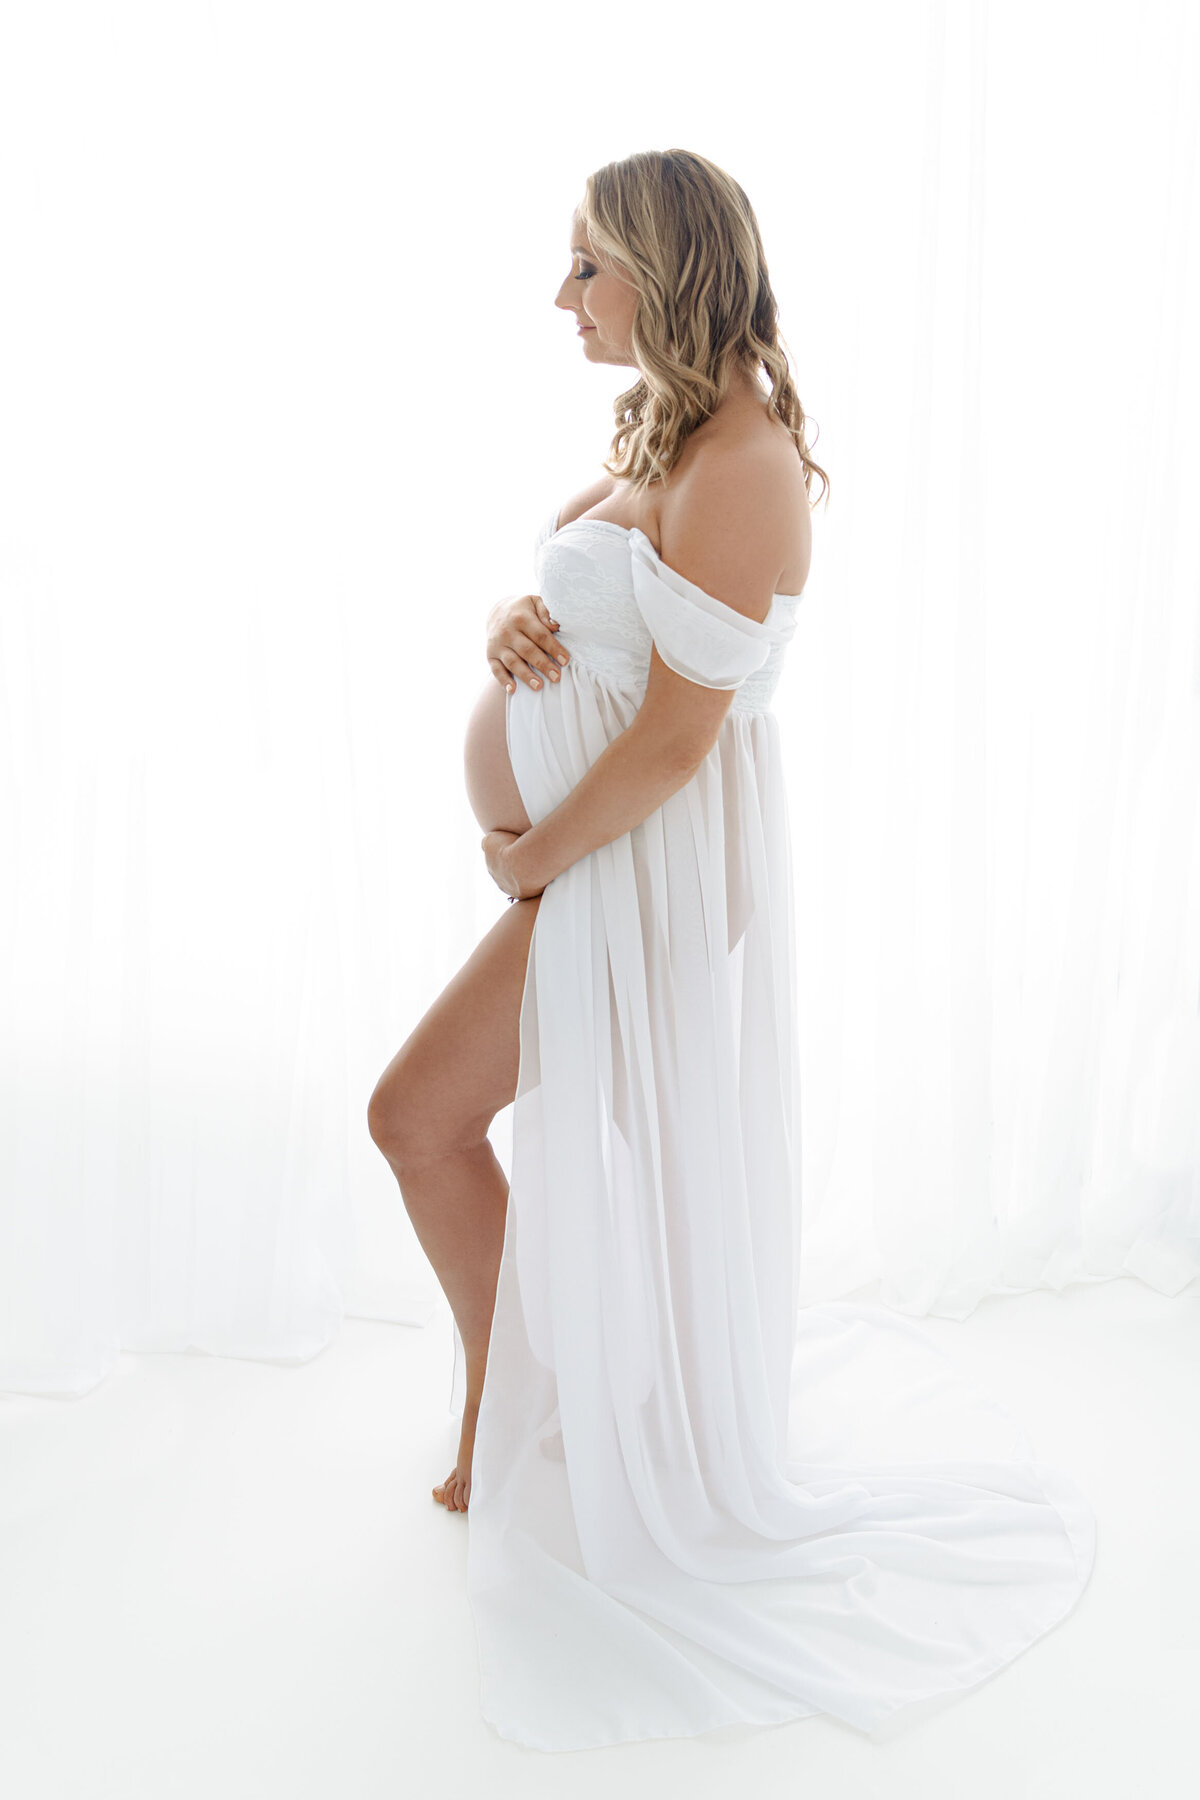 Backlit image of expecting mom holding belly dressed in white sheer gown